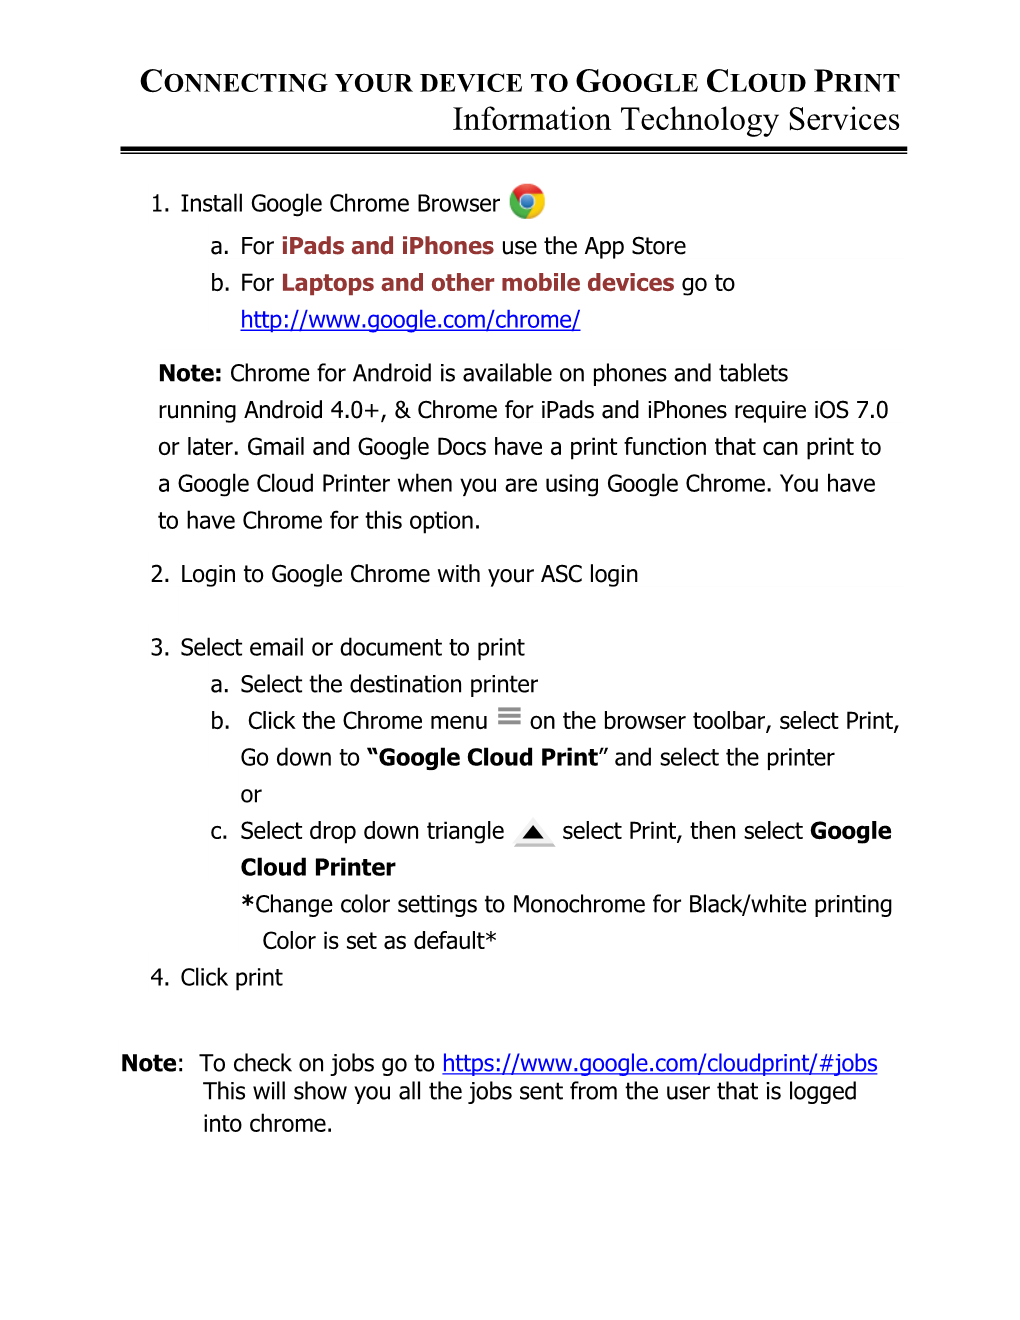 CONNECTING YOUR DEVICE to GOOGLE CLOUD PRINT Information Technology Services